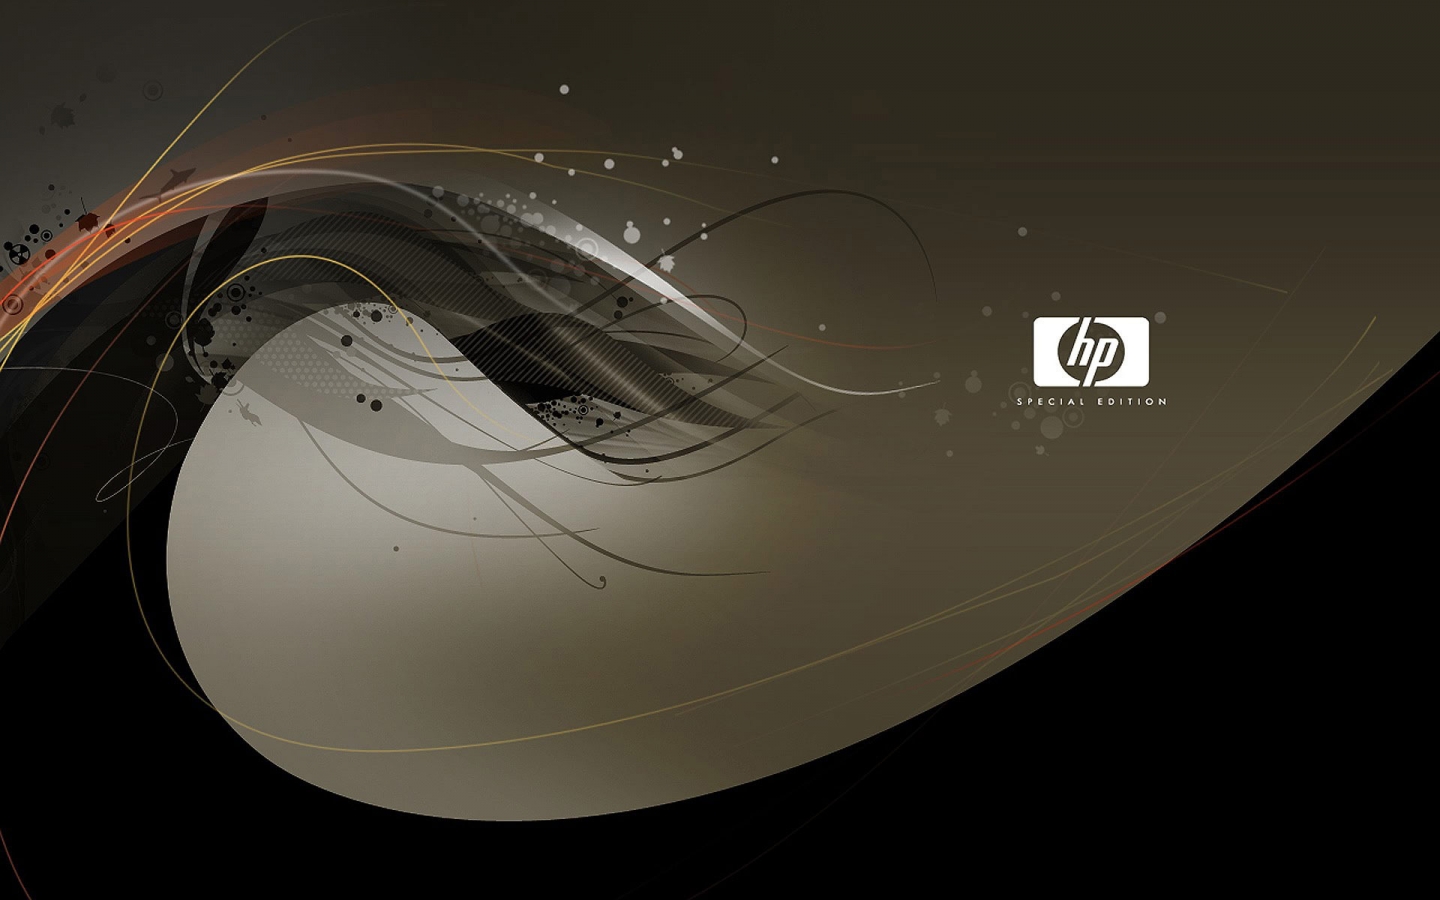 HP Special Edition for 1440 x 900 widescreen resolution